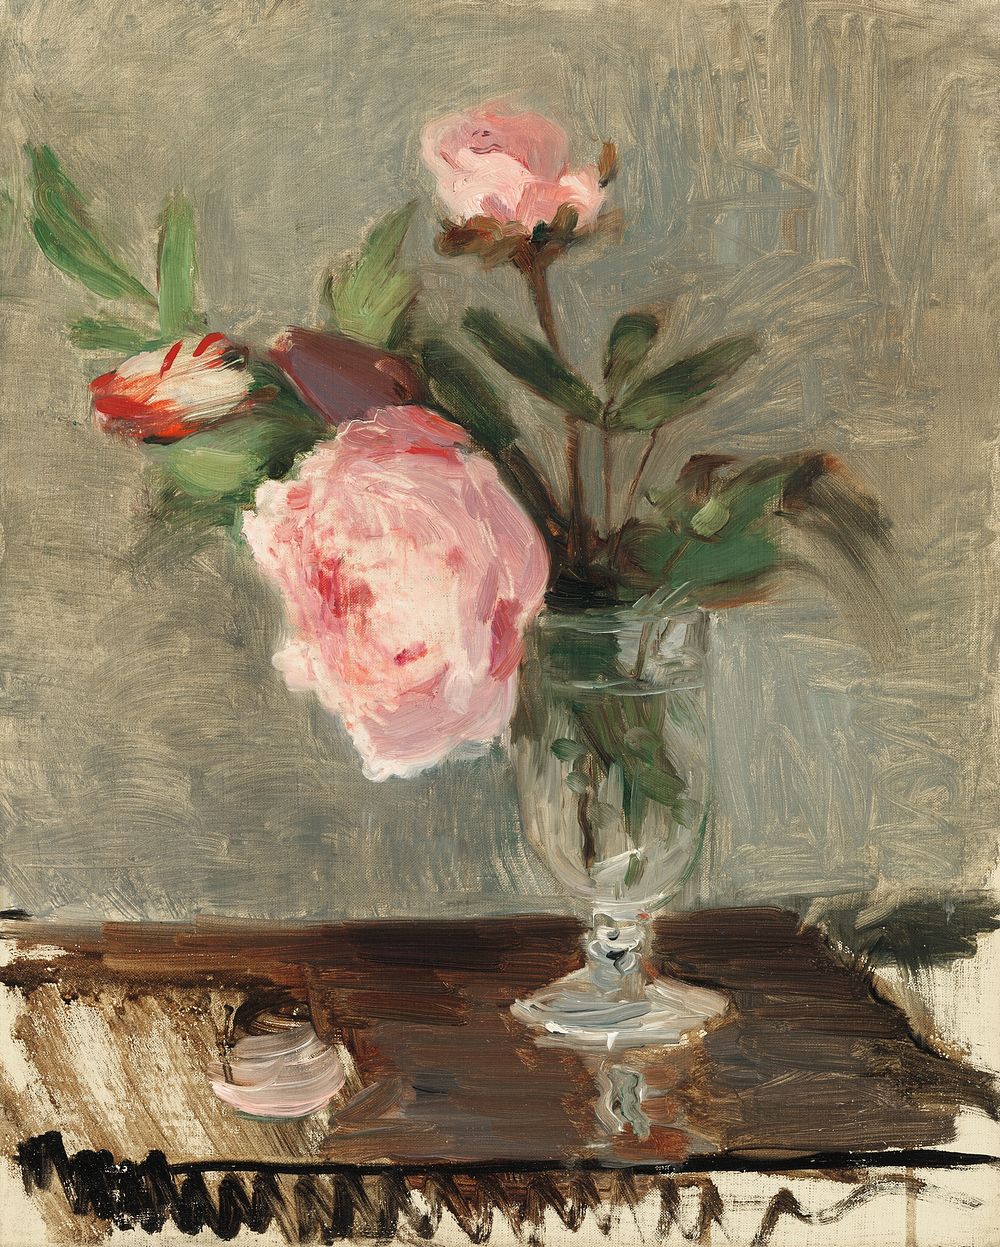 Aesthetic peonies painting. Original public domain image by Berthe Morisot from the National Gallery of Art. Digitally…